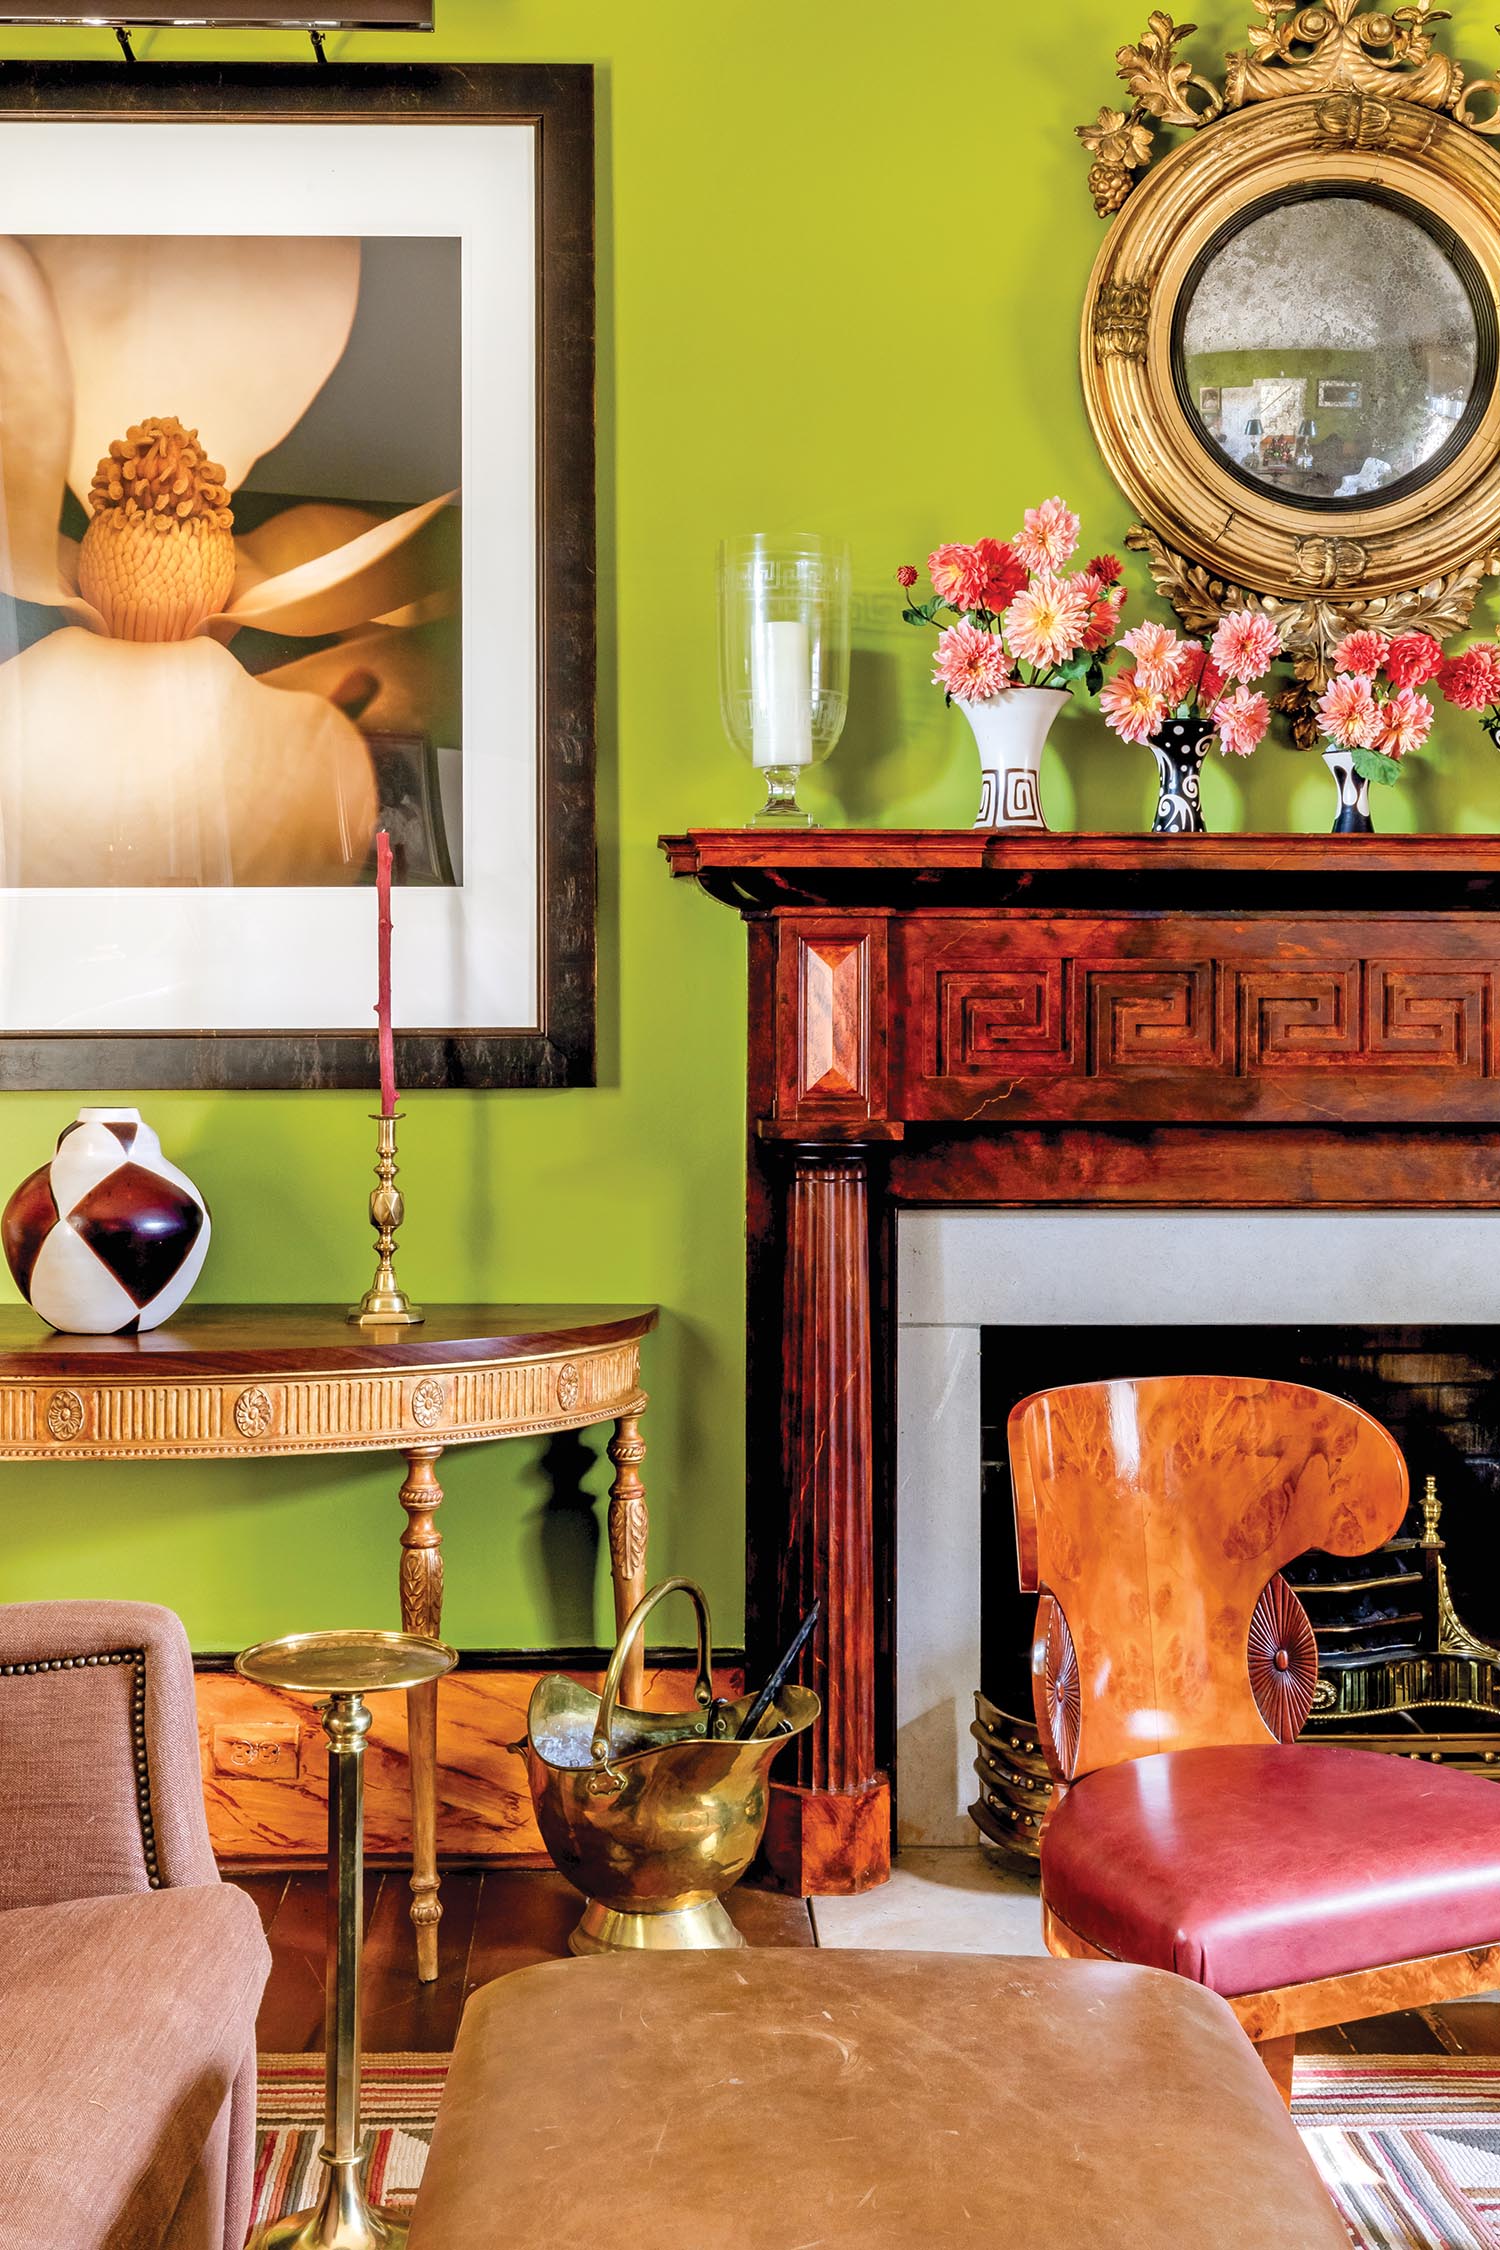 A bright green parlor is filled with golden brown antiques, a floral photograph, a gold mirror, and pink dahlias on the mantel.